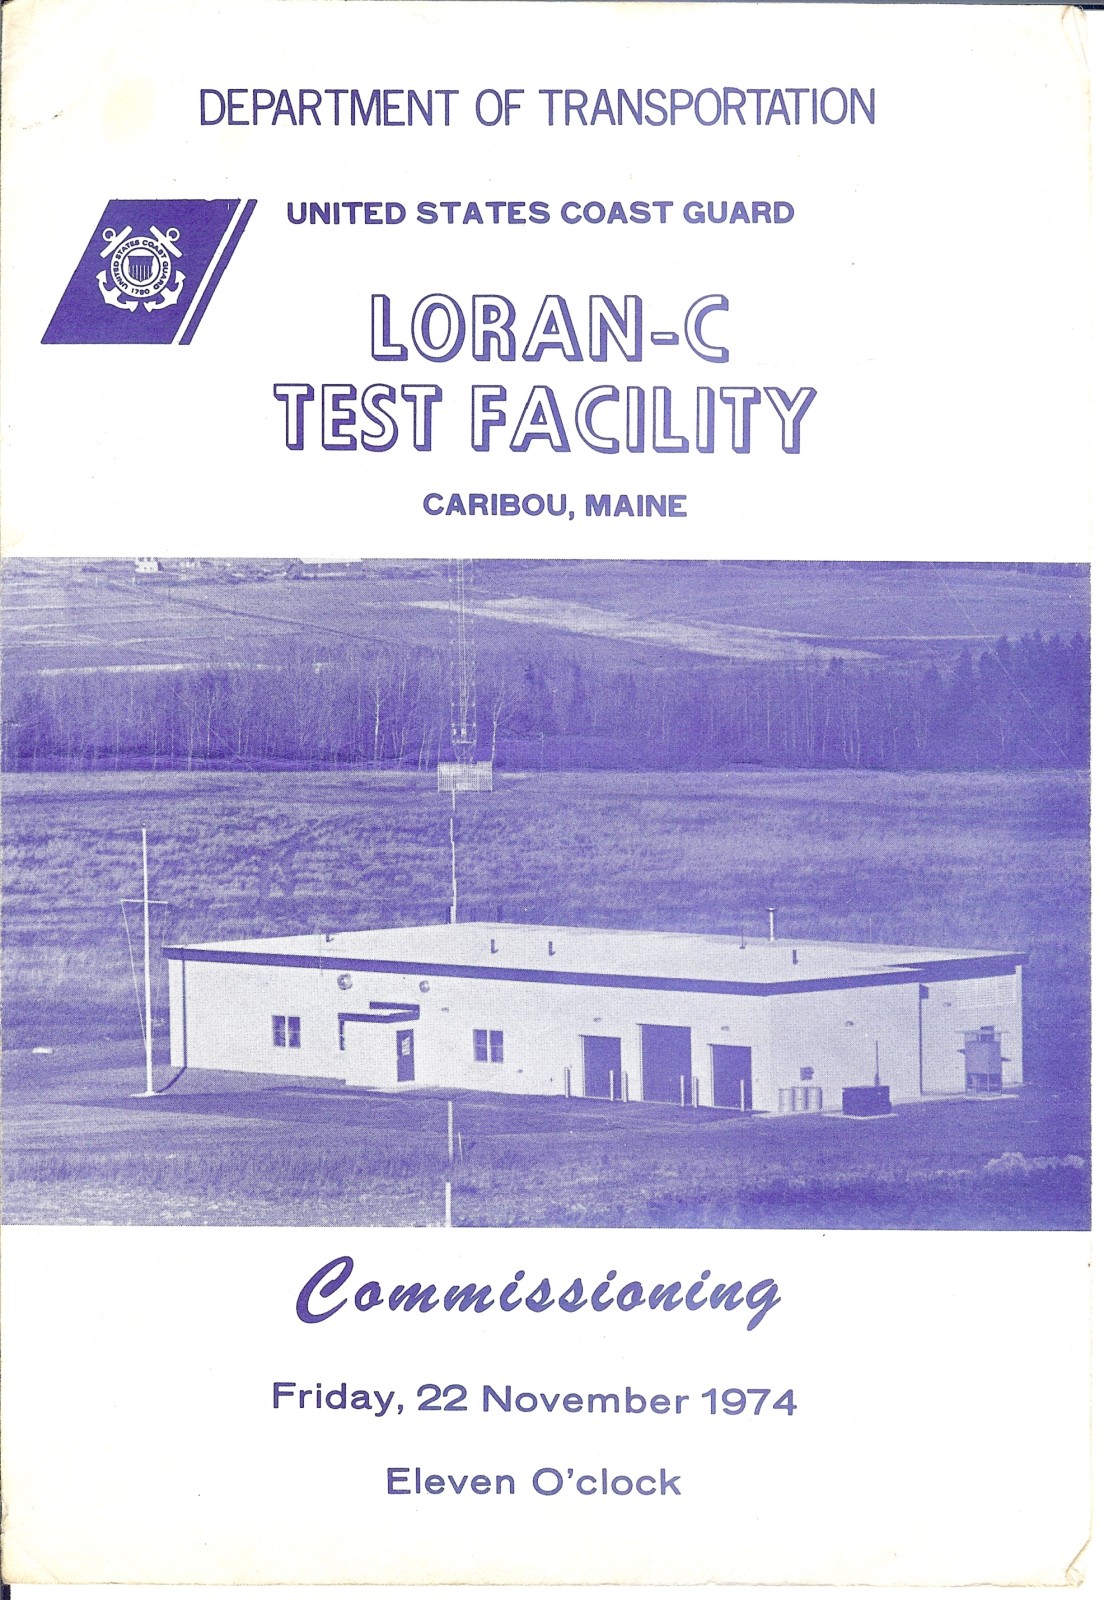 LORTESTFAC Commissioning front page